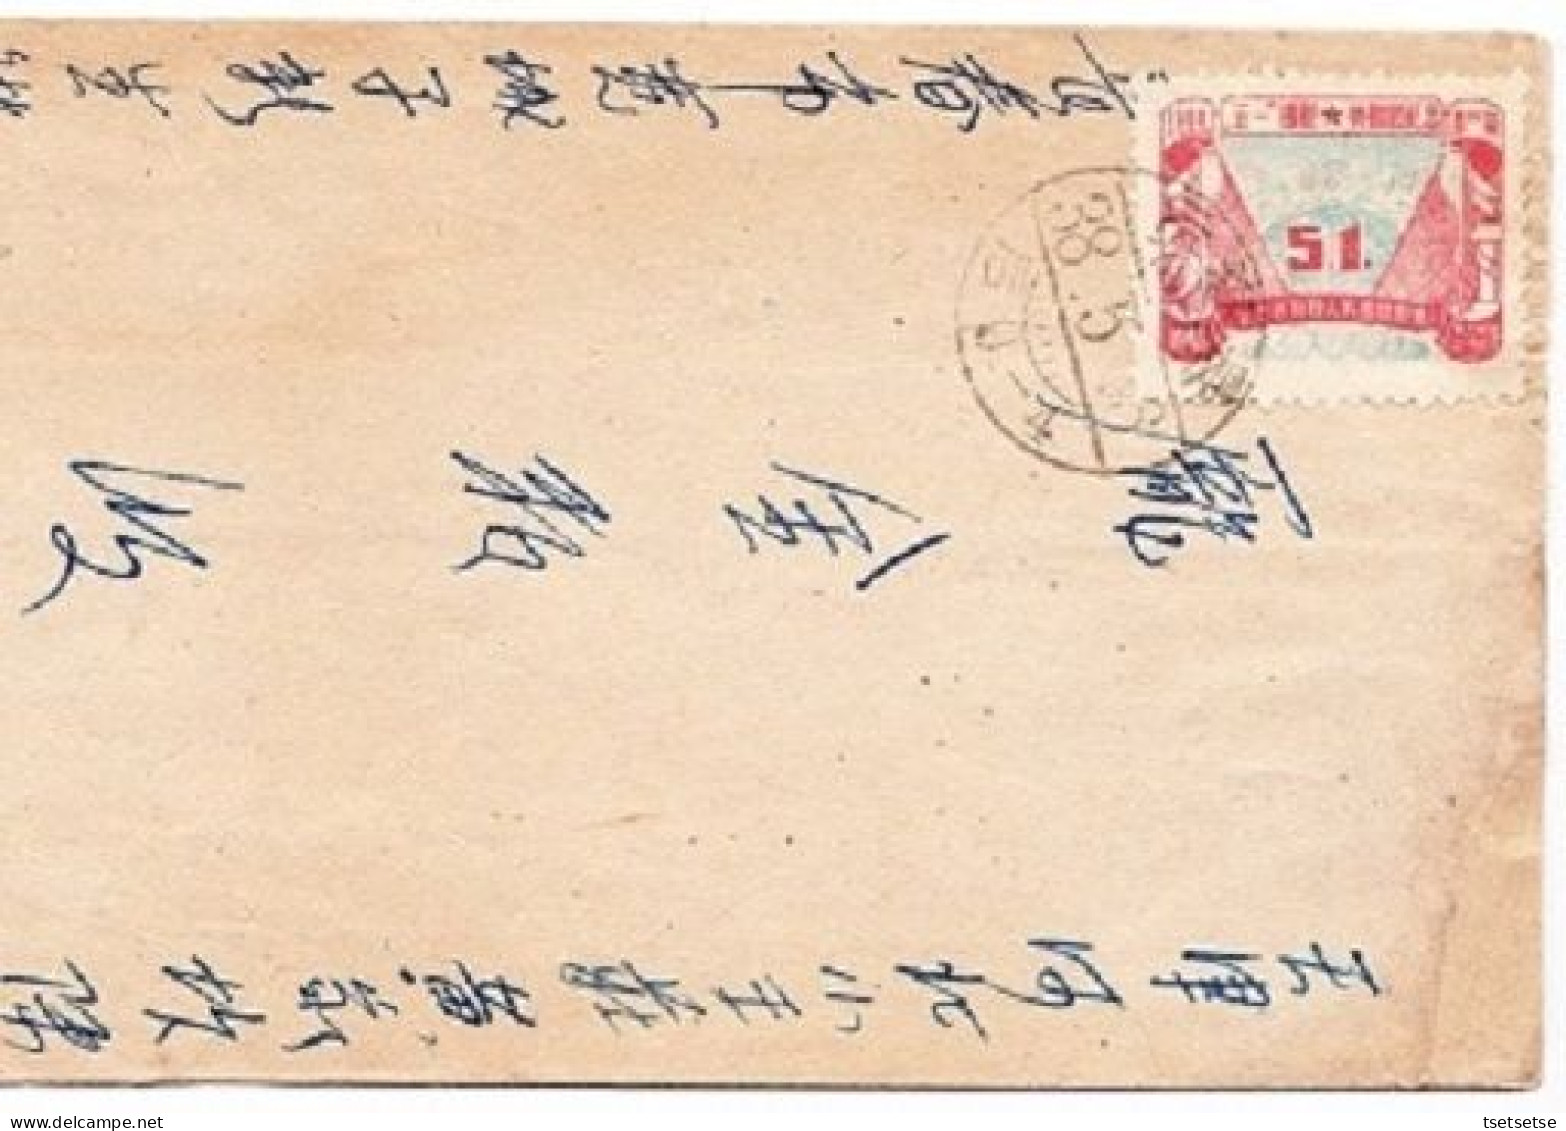 Rare! $851+! 1949 Liberated Area Cover Forerunner P.R. China NE "觧放区" Franked With Labour Day $1500 Scott #1L107 Stamp - Chine Du Nord-Est 1946-48